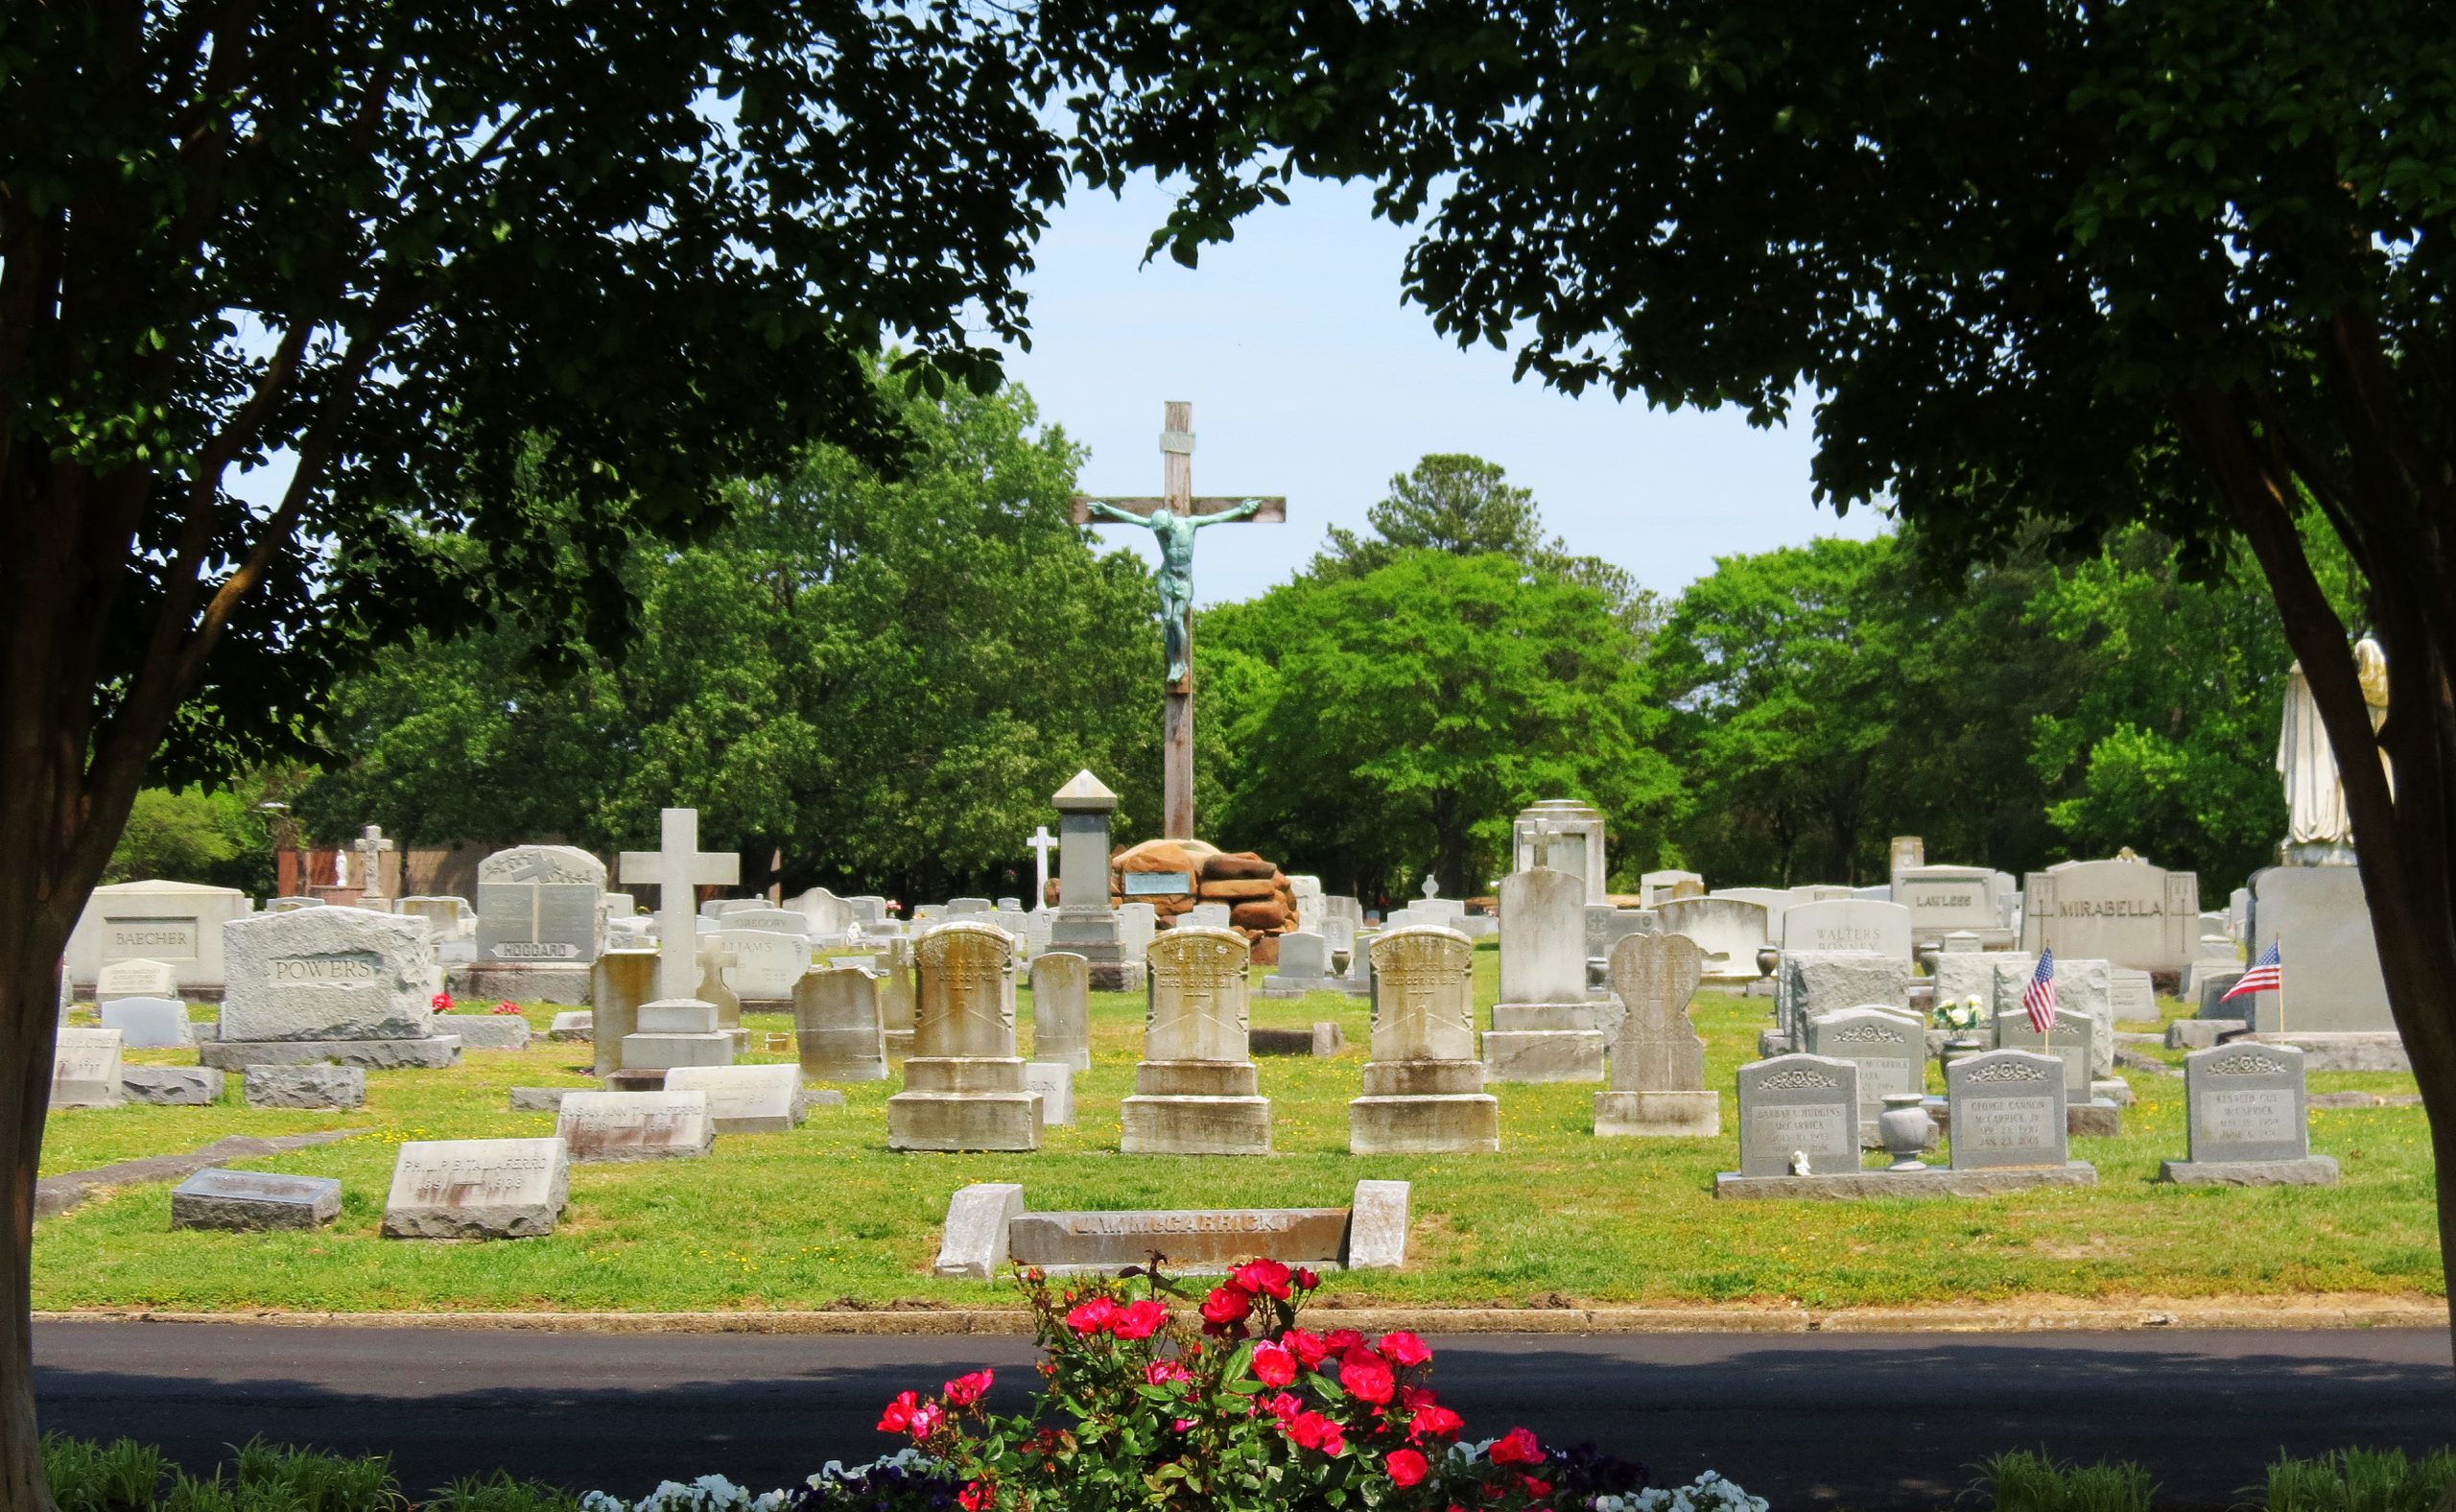 122-1036_St_Marys_CatholicCemetery_2022_VLR_Online-scaled